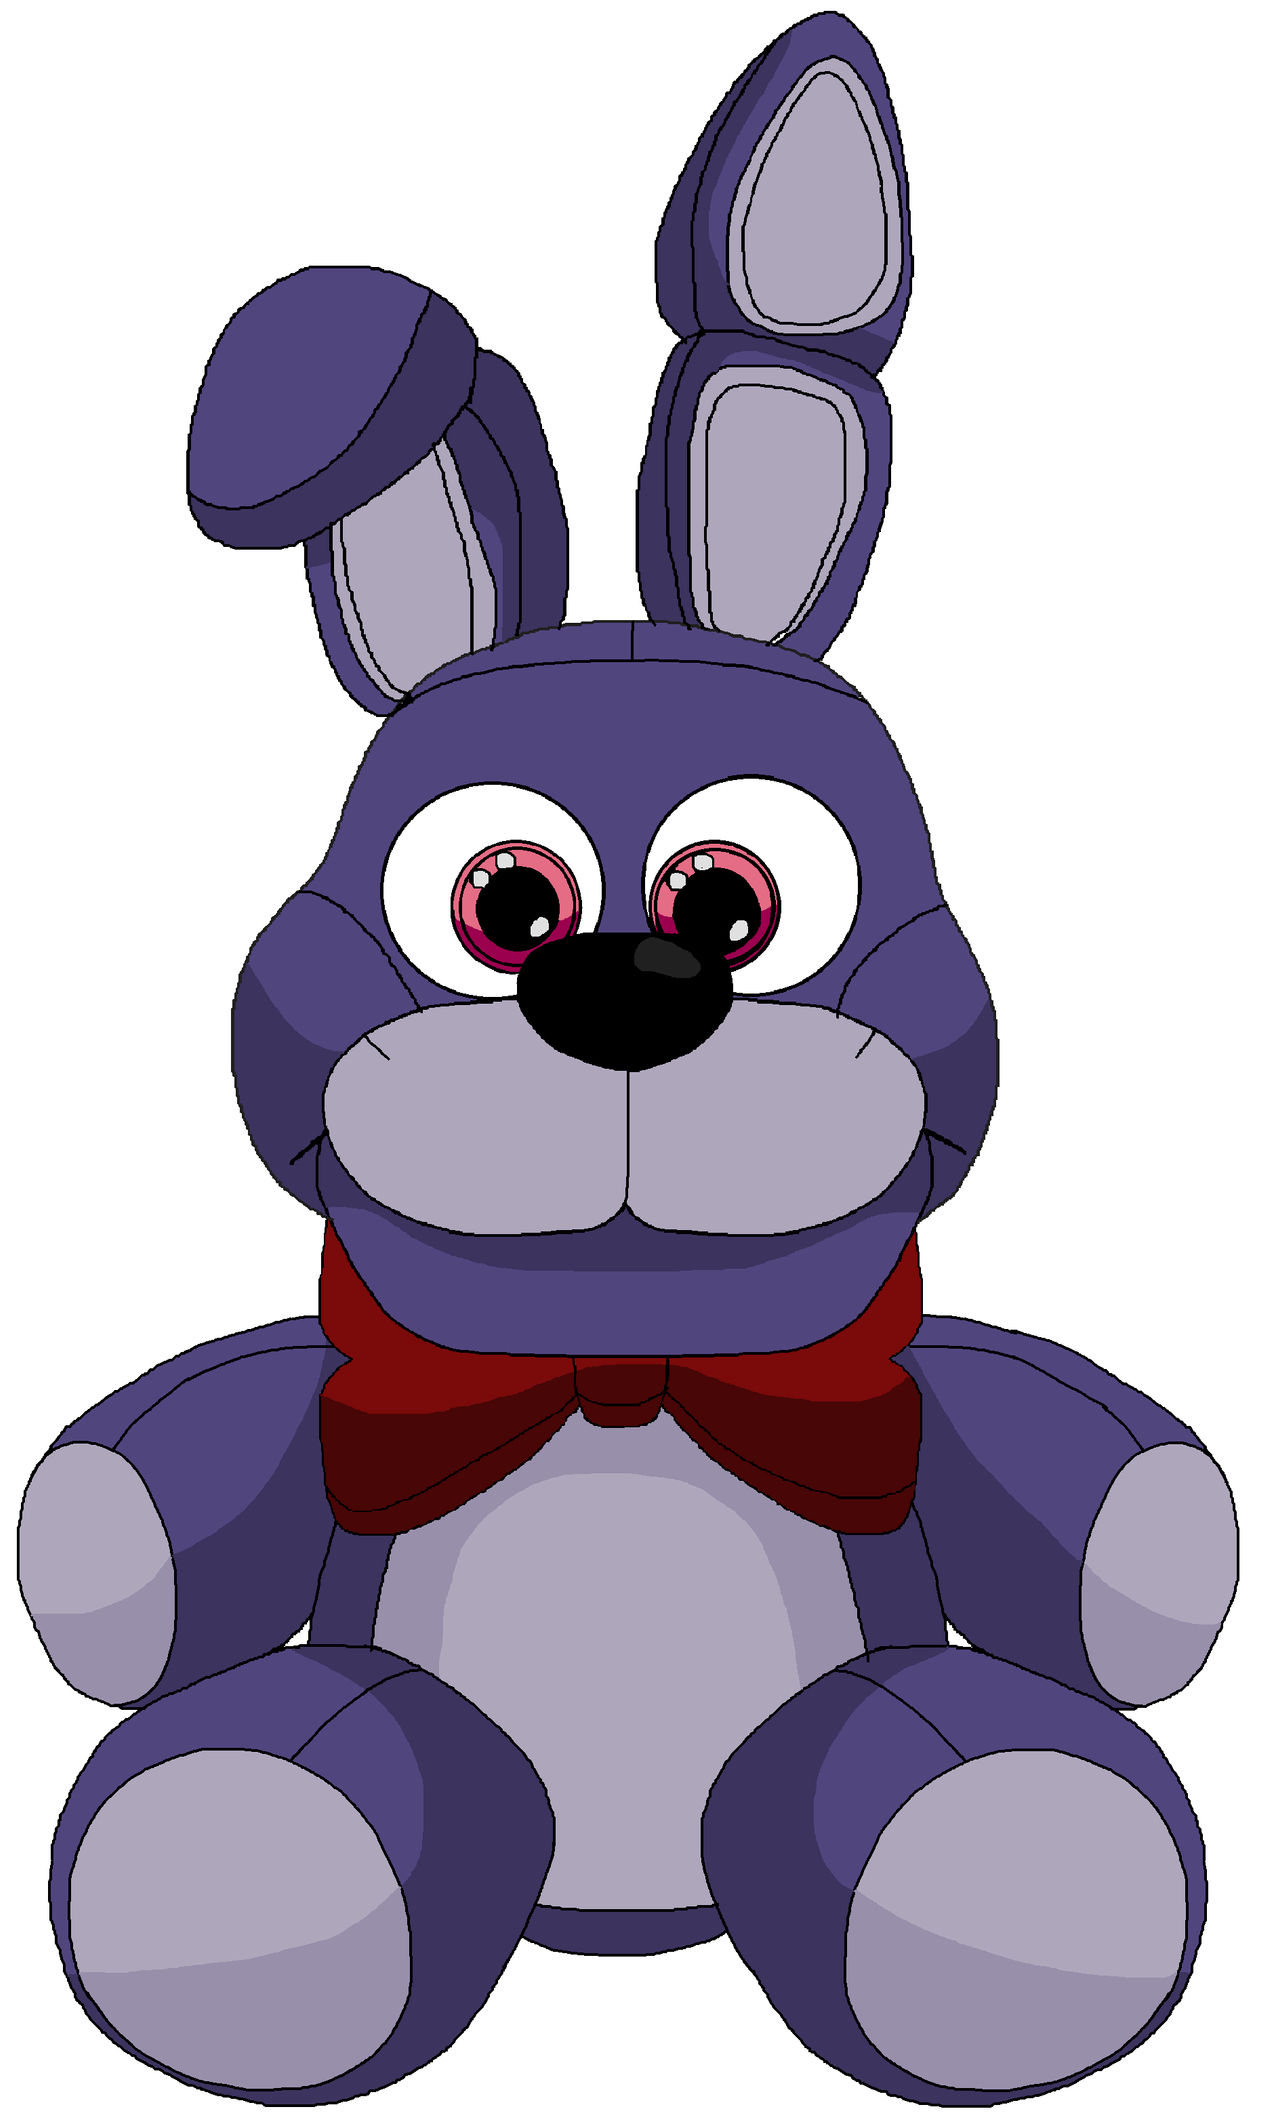 Drawing Of Bonnie (Toy Story Version) by JohnV2004 on DeviantArt